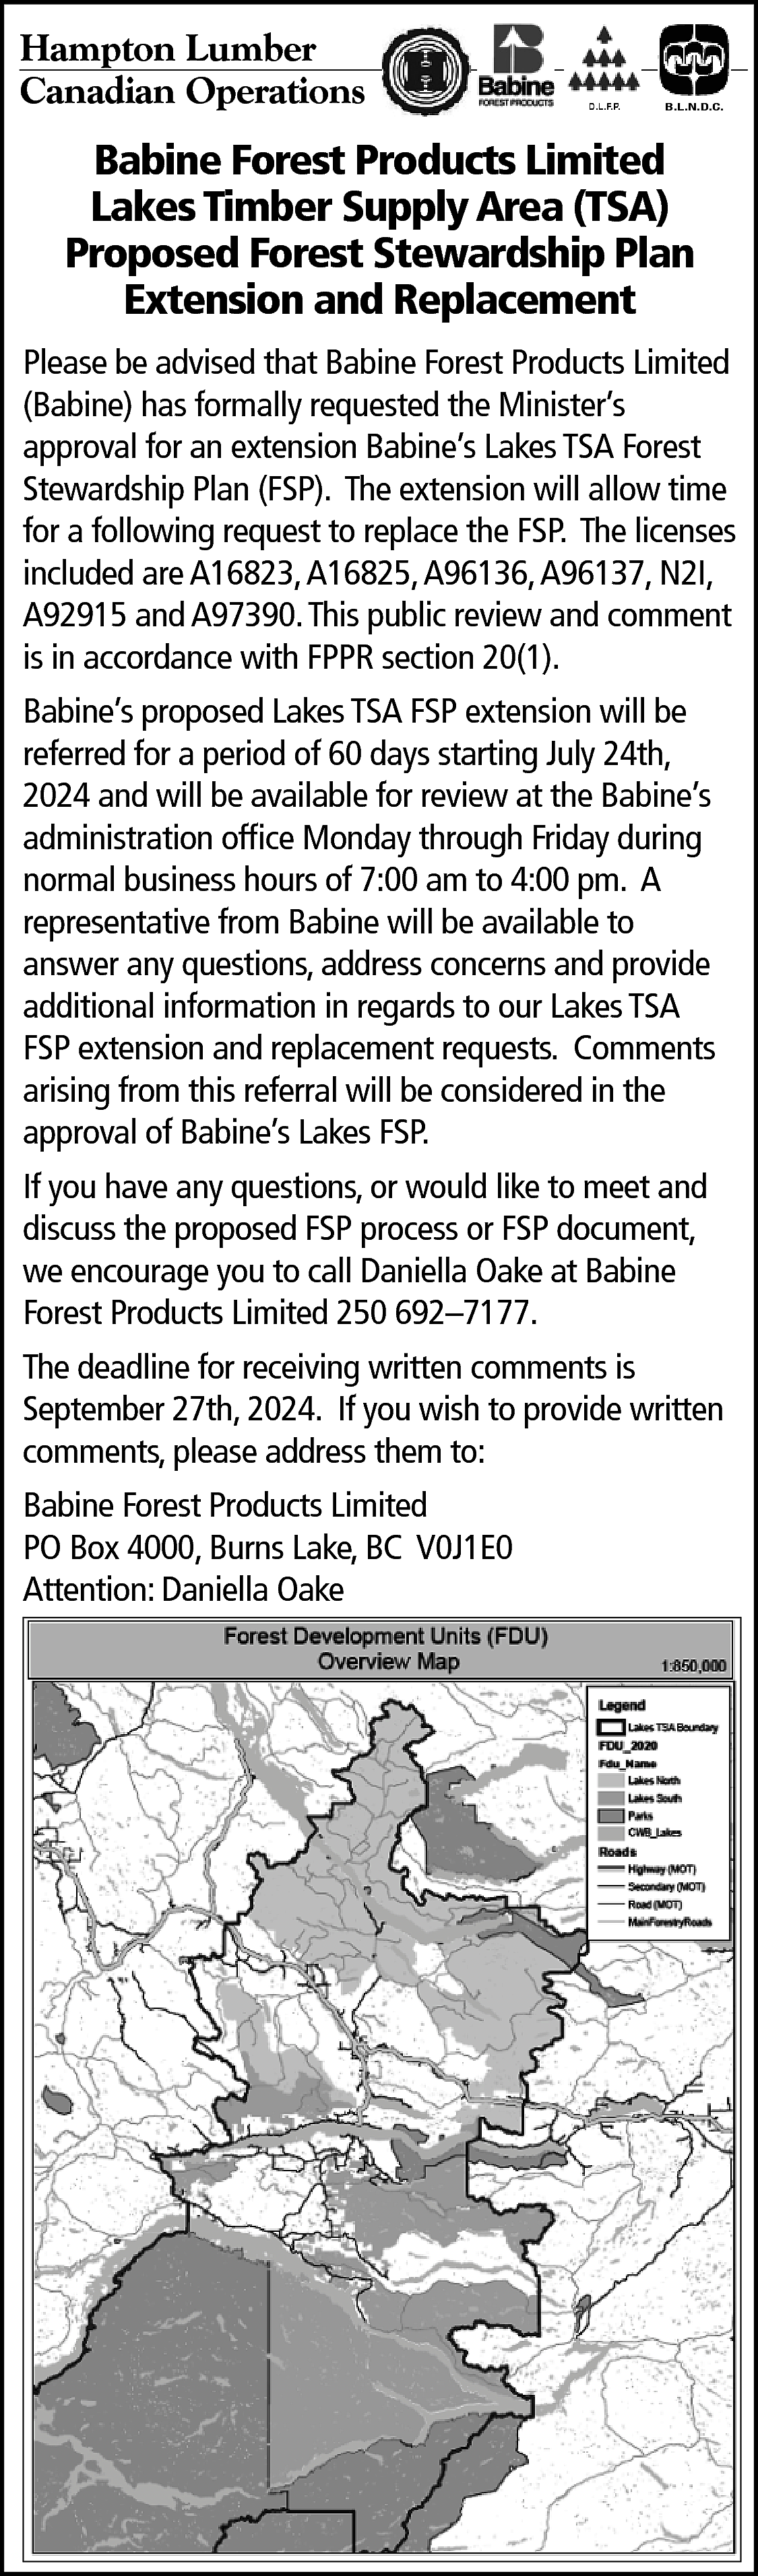 Hampton Lumber <br>Canadian Operations <br>  Hampton Lumber  Canadian Operations    B.L.N.D.C.    Babine Forest Products Limited  Lakes Timber Supply Area (TSA)  Proposed Forest Stewardship Plan  Extension and Replacement  Please be advised that Babine Forest Products Limited  (Babine) has formally requested the Minister’s  approval for an extension Babine’s Lakes TSA Forest  Stewardship Plan (FSP). The extension will allow time  for a following request to replace the FSP. The licenses  included are A16823, A16825, A96136, A96137, N2I,  A92915 and A97390. This public review and comment  is in accordance with FPPR section 20(1).  Babine’s proposed Lakes TSA FSP extension will be  referred for a period of 60 days starting July 24th,  2024 and will be available for review at the Babine’s  administration office Monday through Friday during  normal business hours of 7:00 am to 4:00 pm. A  representative from Babine will be available to  answer any questions, address concerns and provide  additional information in regards to our Lakes TSA  FSP extension and replacement requests. Comments  arising from this referral will be considered in the  approval of Babine’s Lakes FSP.  If you have any questions, or would like to meet and  discuss the proposed FSP process or FSP document,  we encourage you to call Daniella Oake at Babine  Forest Products Limited 250 692–7177.  The deadline for receiving written comments is  September 27th, 2024. If you wish to provide written  comments, please address them to:  Babine Forest Products Limited  PO Box 4000, Burns Lake, BC V0J1E0  Attention: Daniella Oake    